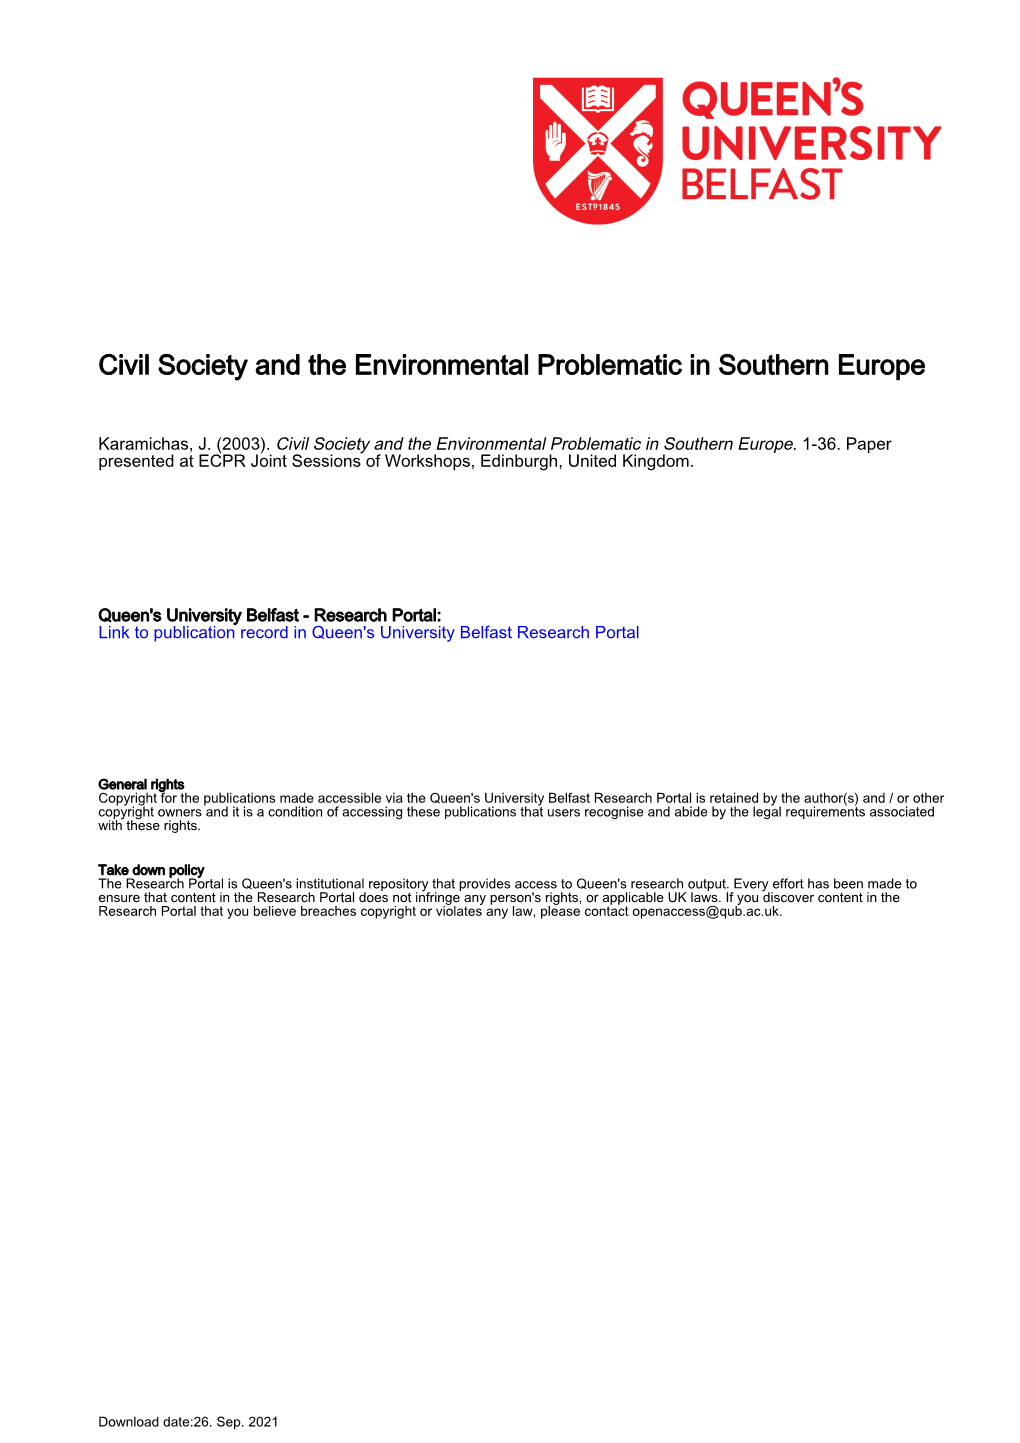 Civil Society and the Environmental Problematic in Southern Europe